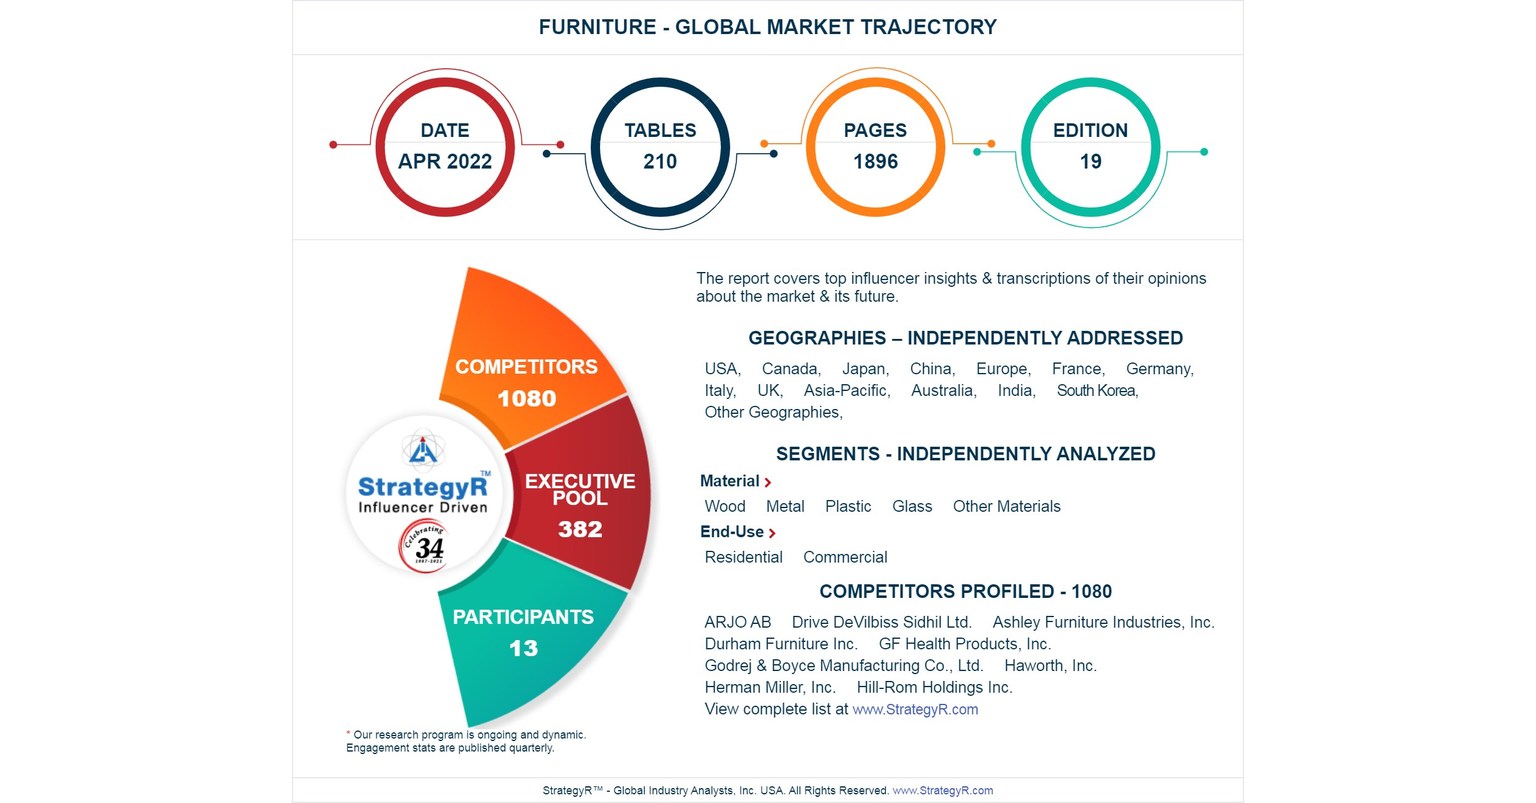 Global Industry Analysts Predicts the World Furniture Market to Reach $686 Billion by 2026